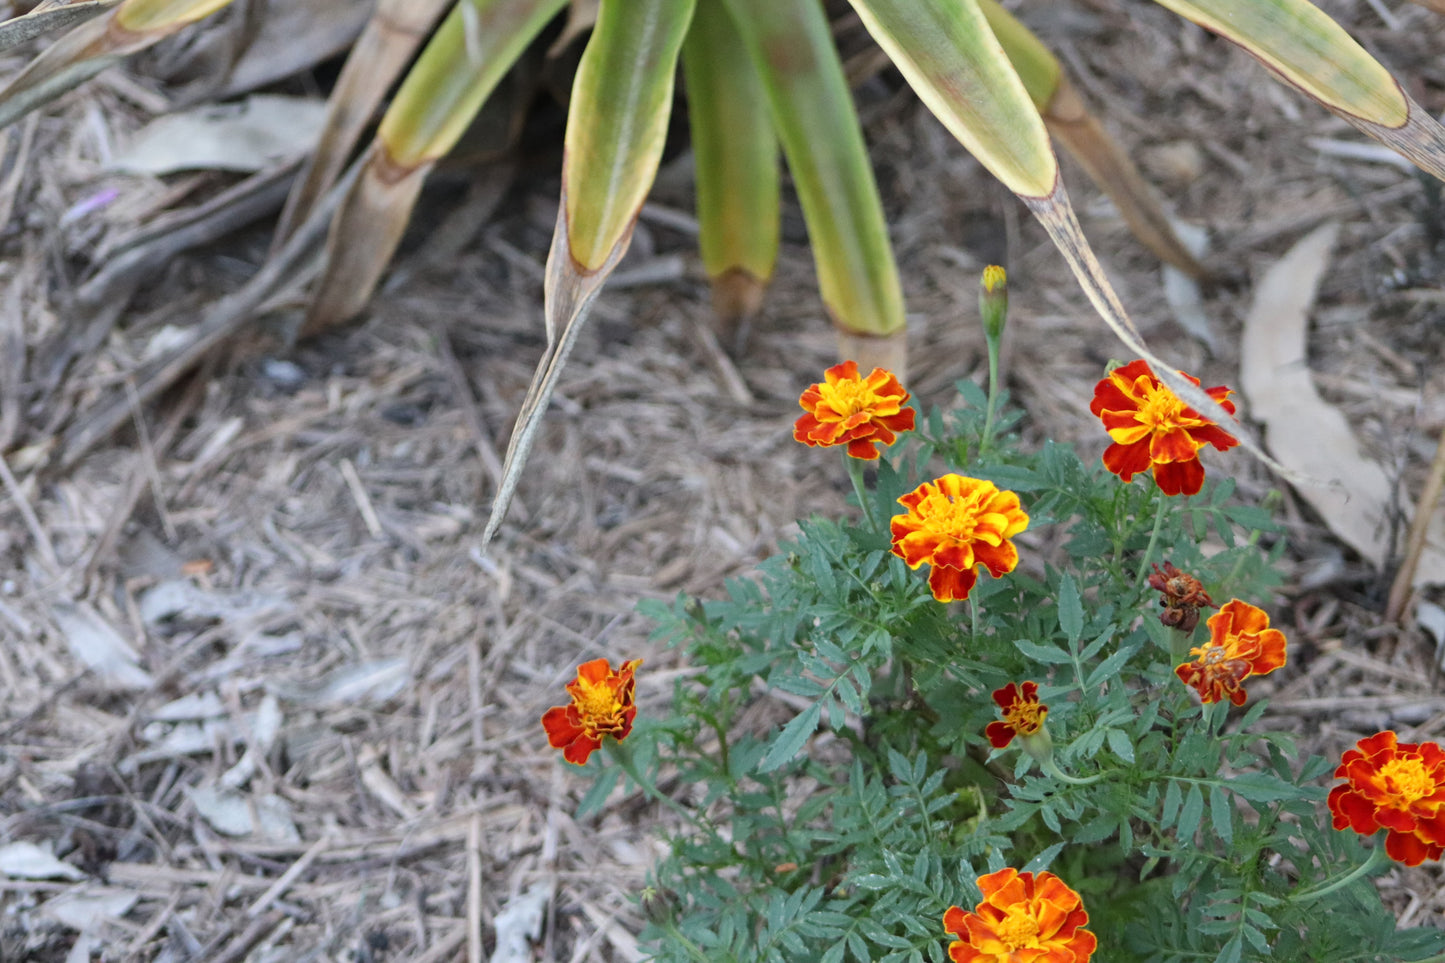 Small bush of the Tagetes patula with yellow and orange flower